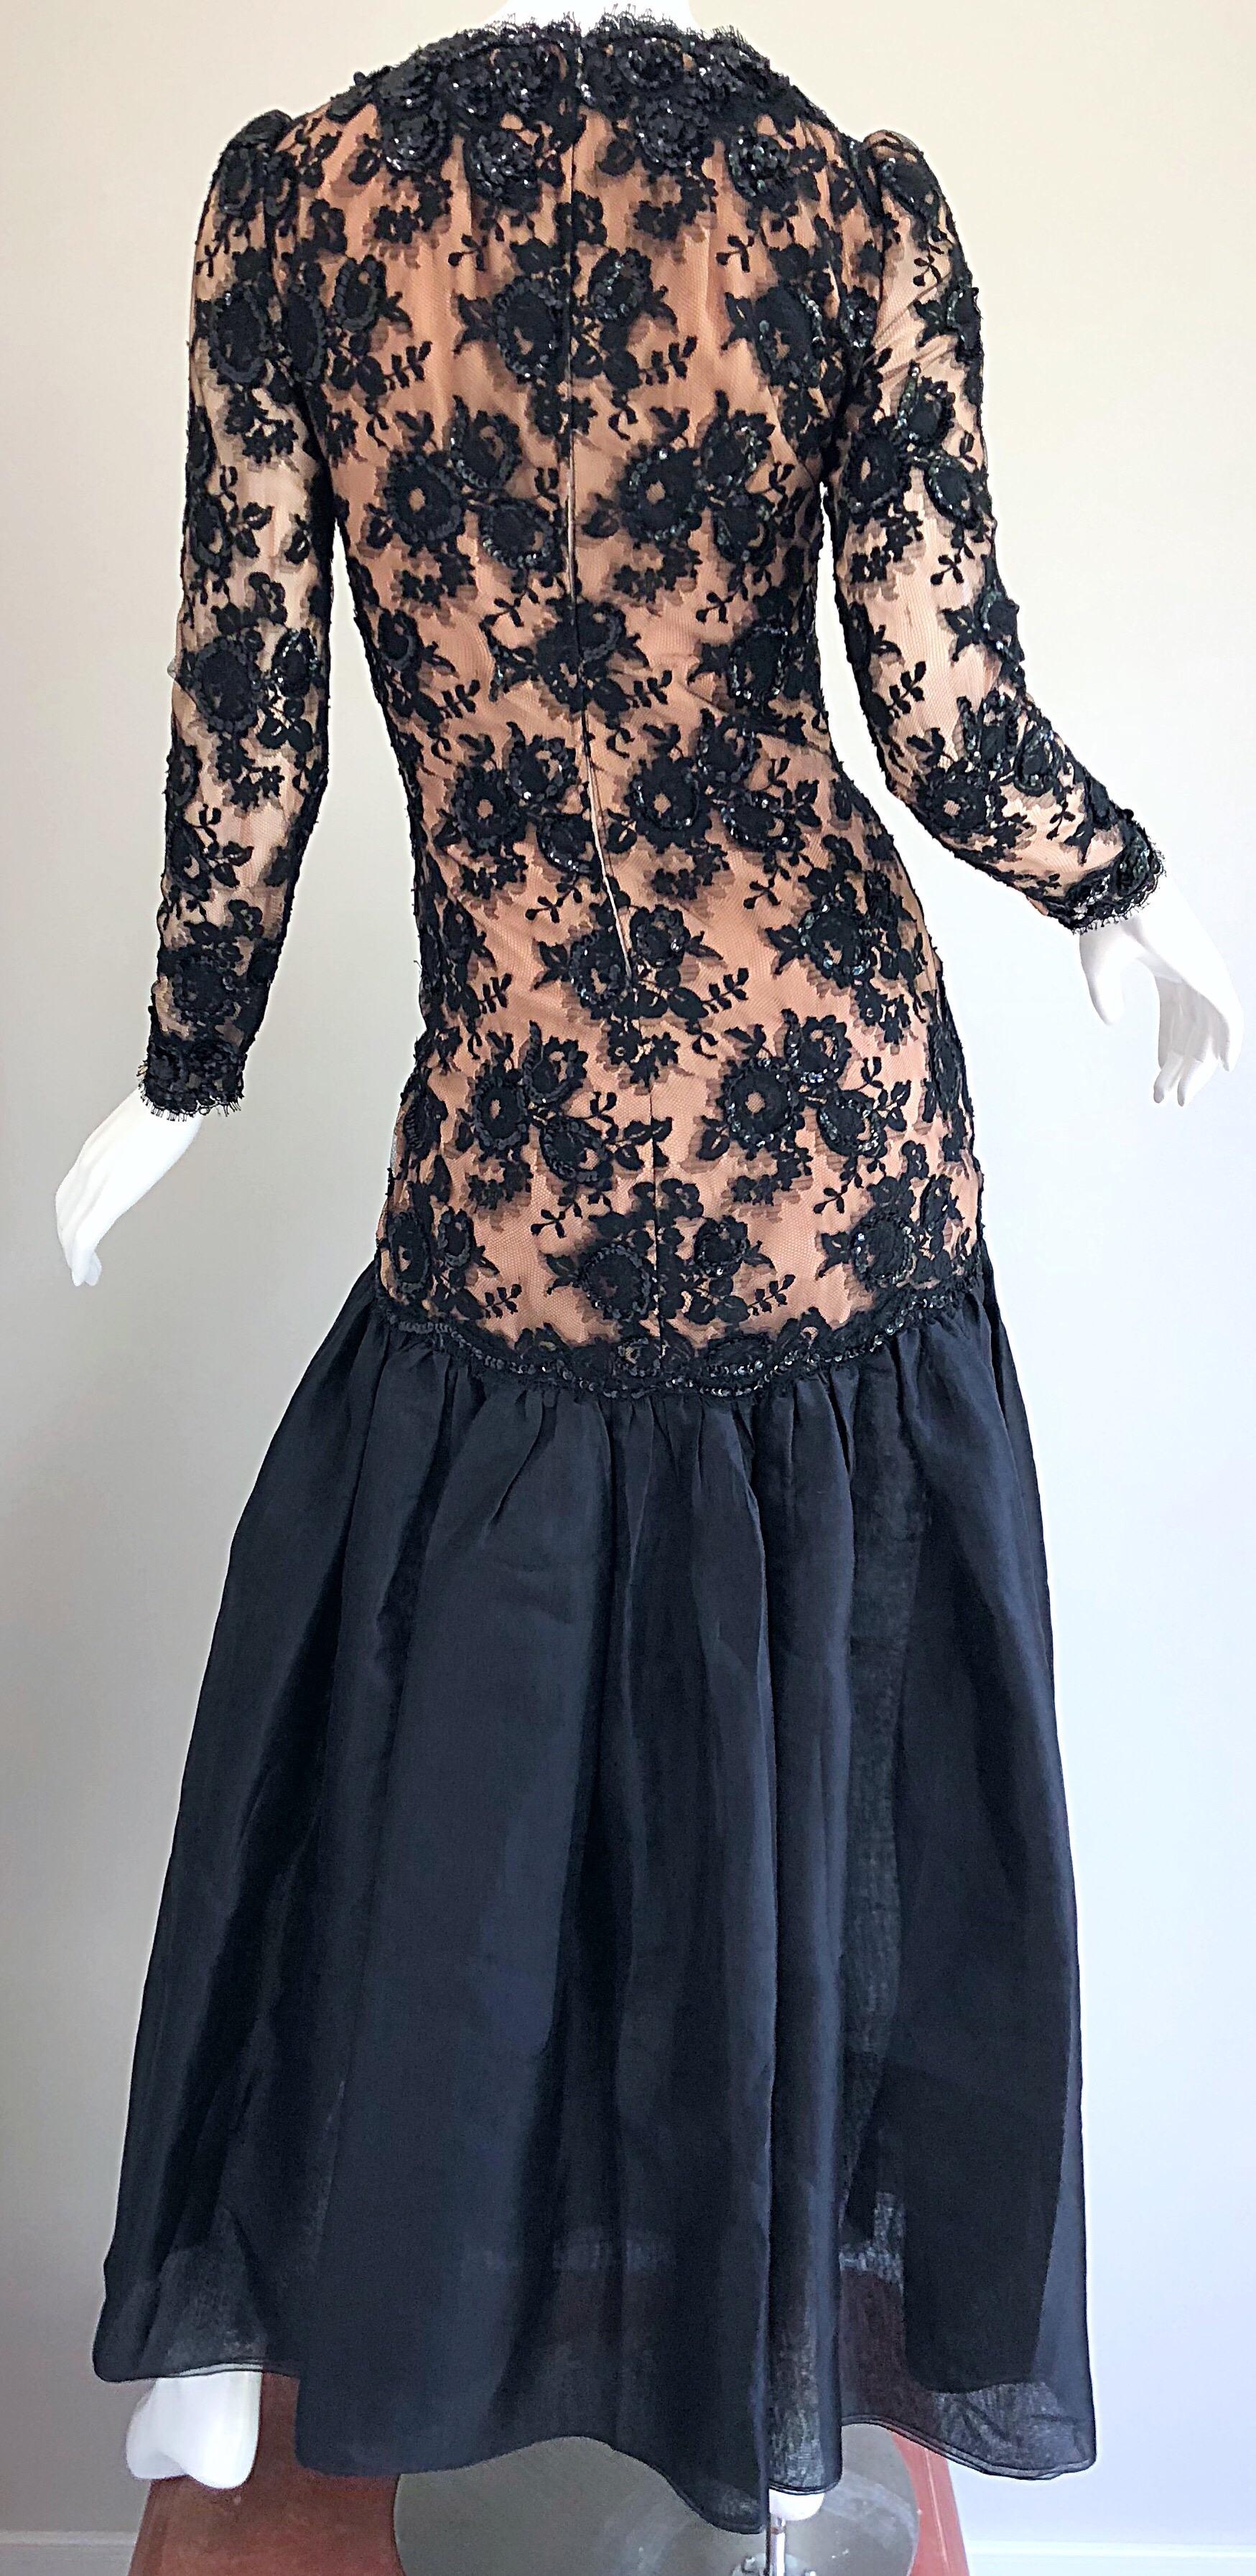 Vintage Bill Blass Black Nude 90s Size 6 / 8 Sequined Chiffon Evening Gown Dress For Sale 5